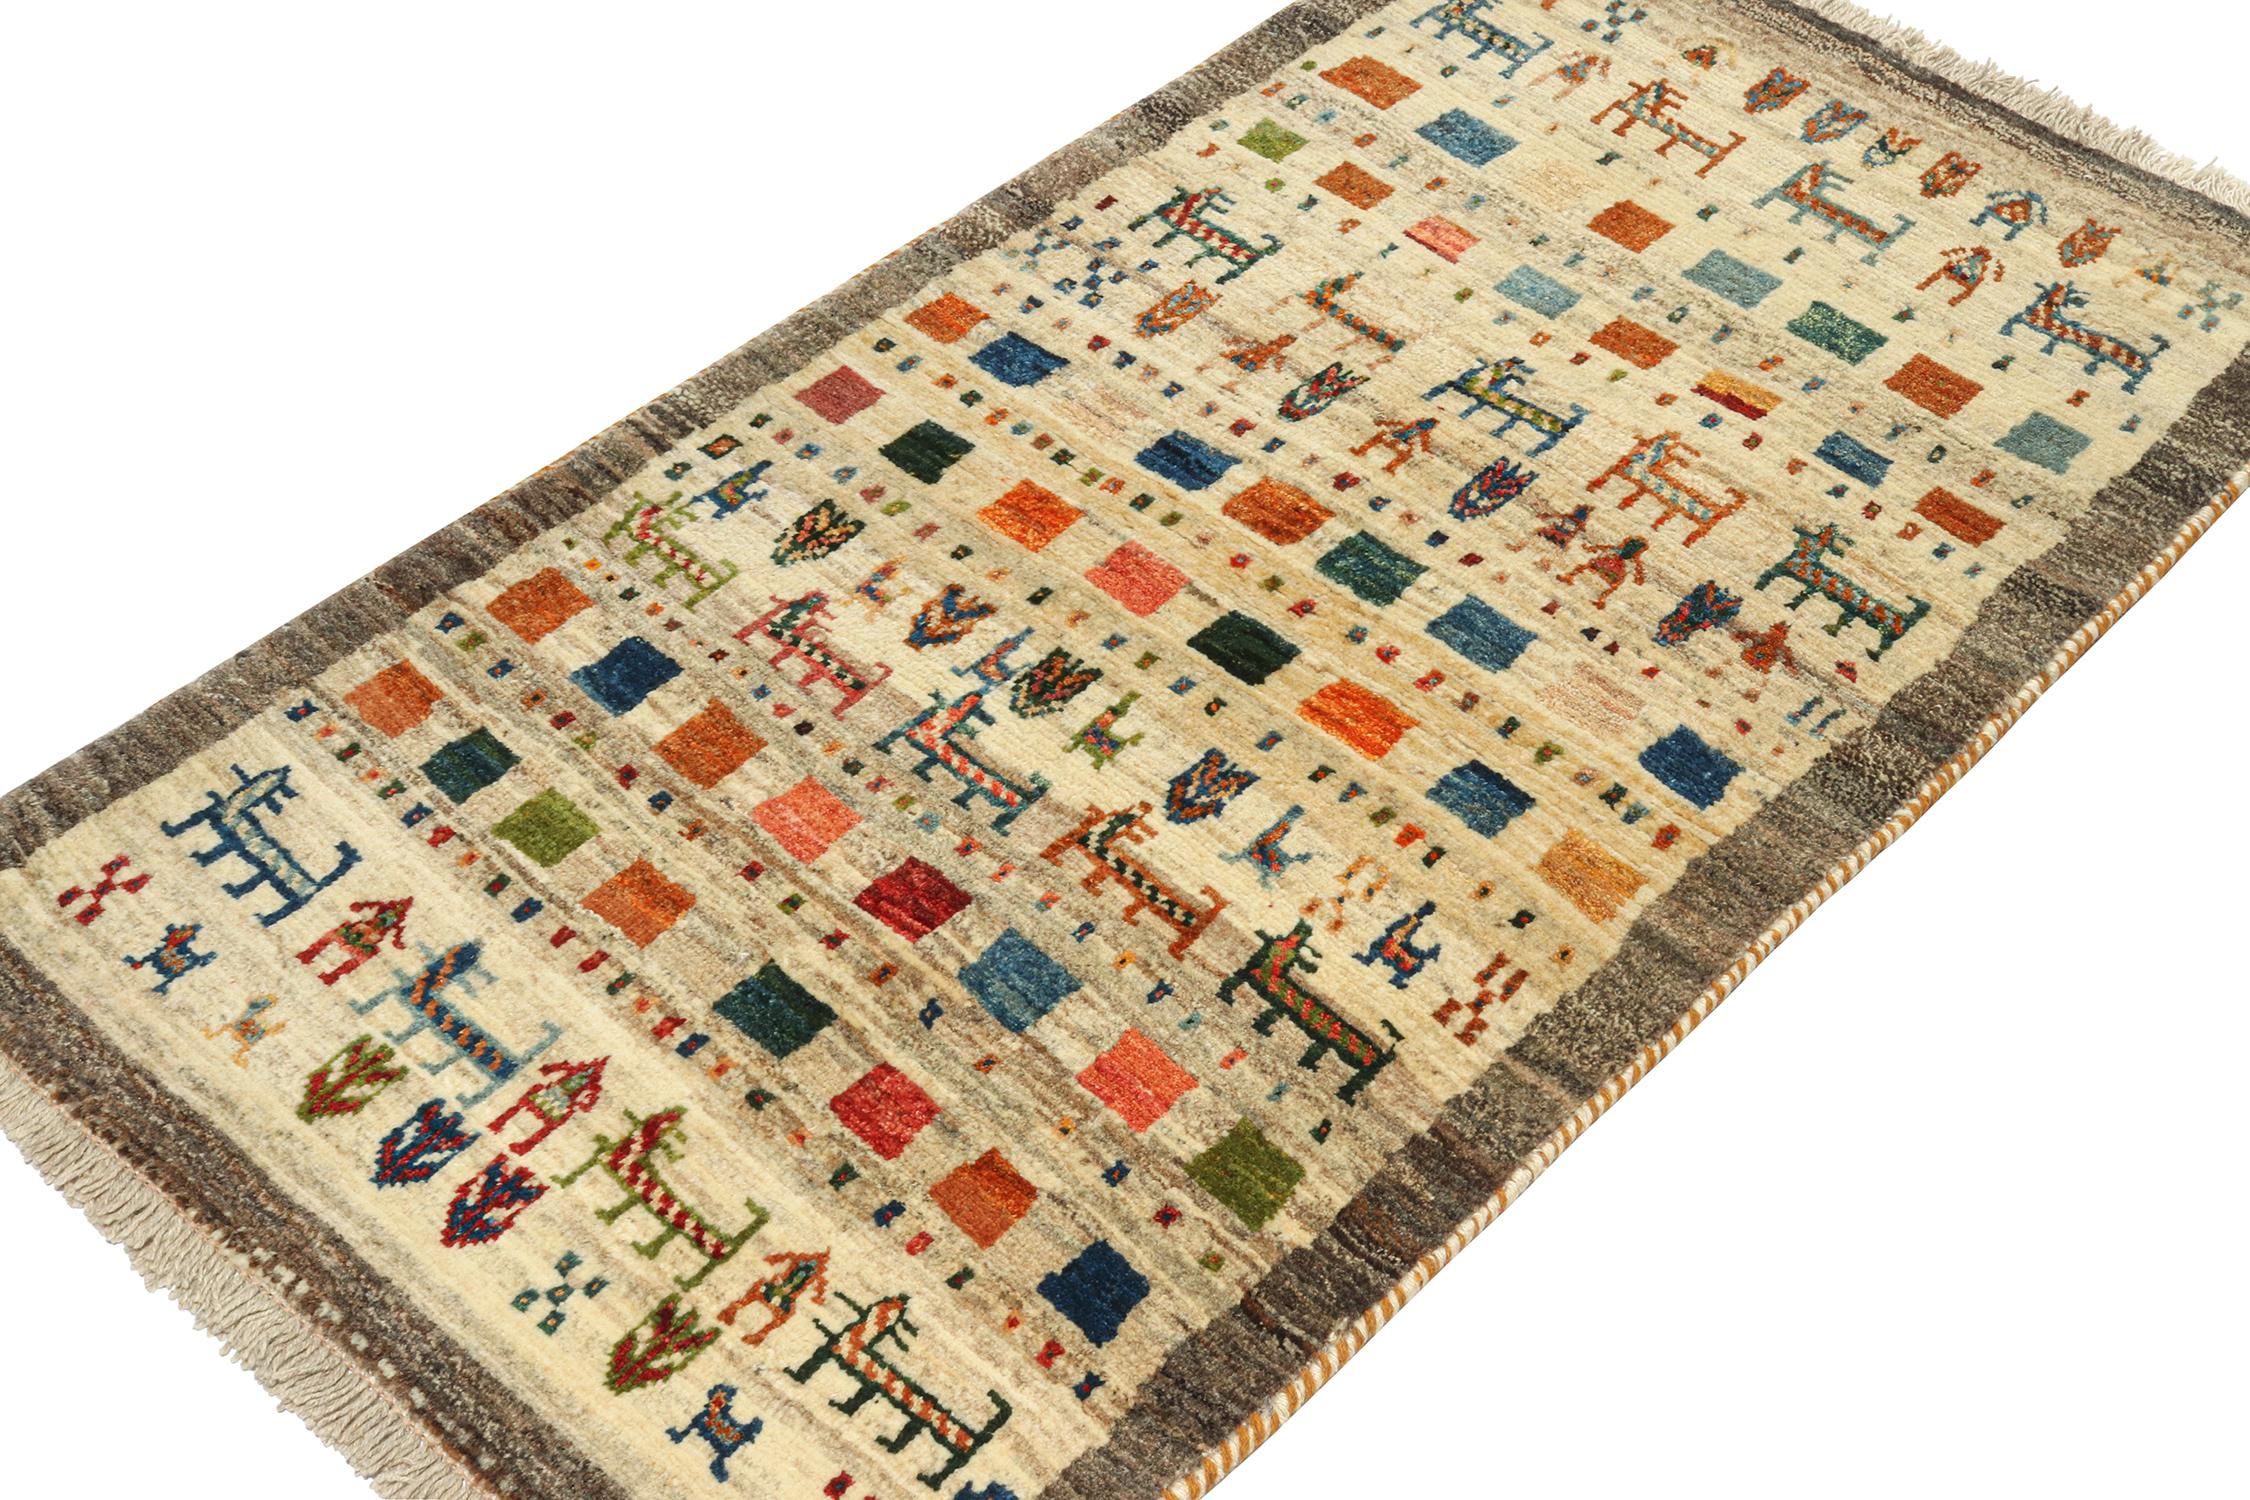 A vintage 3x5 Persian Gabbeh rug, from the latest grand entry to Rug & Kilim’s curation of rare tribal pieces. Hand-knotted in wool circa 1950-1960.
On the Design:
Connoisseurs will appreciate this tribal origin as one of the most primitive,